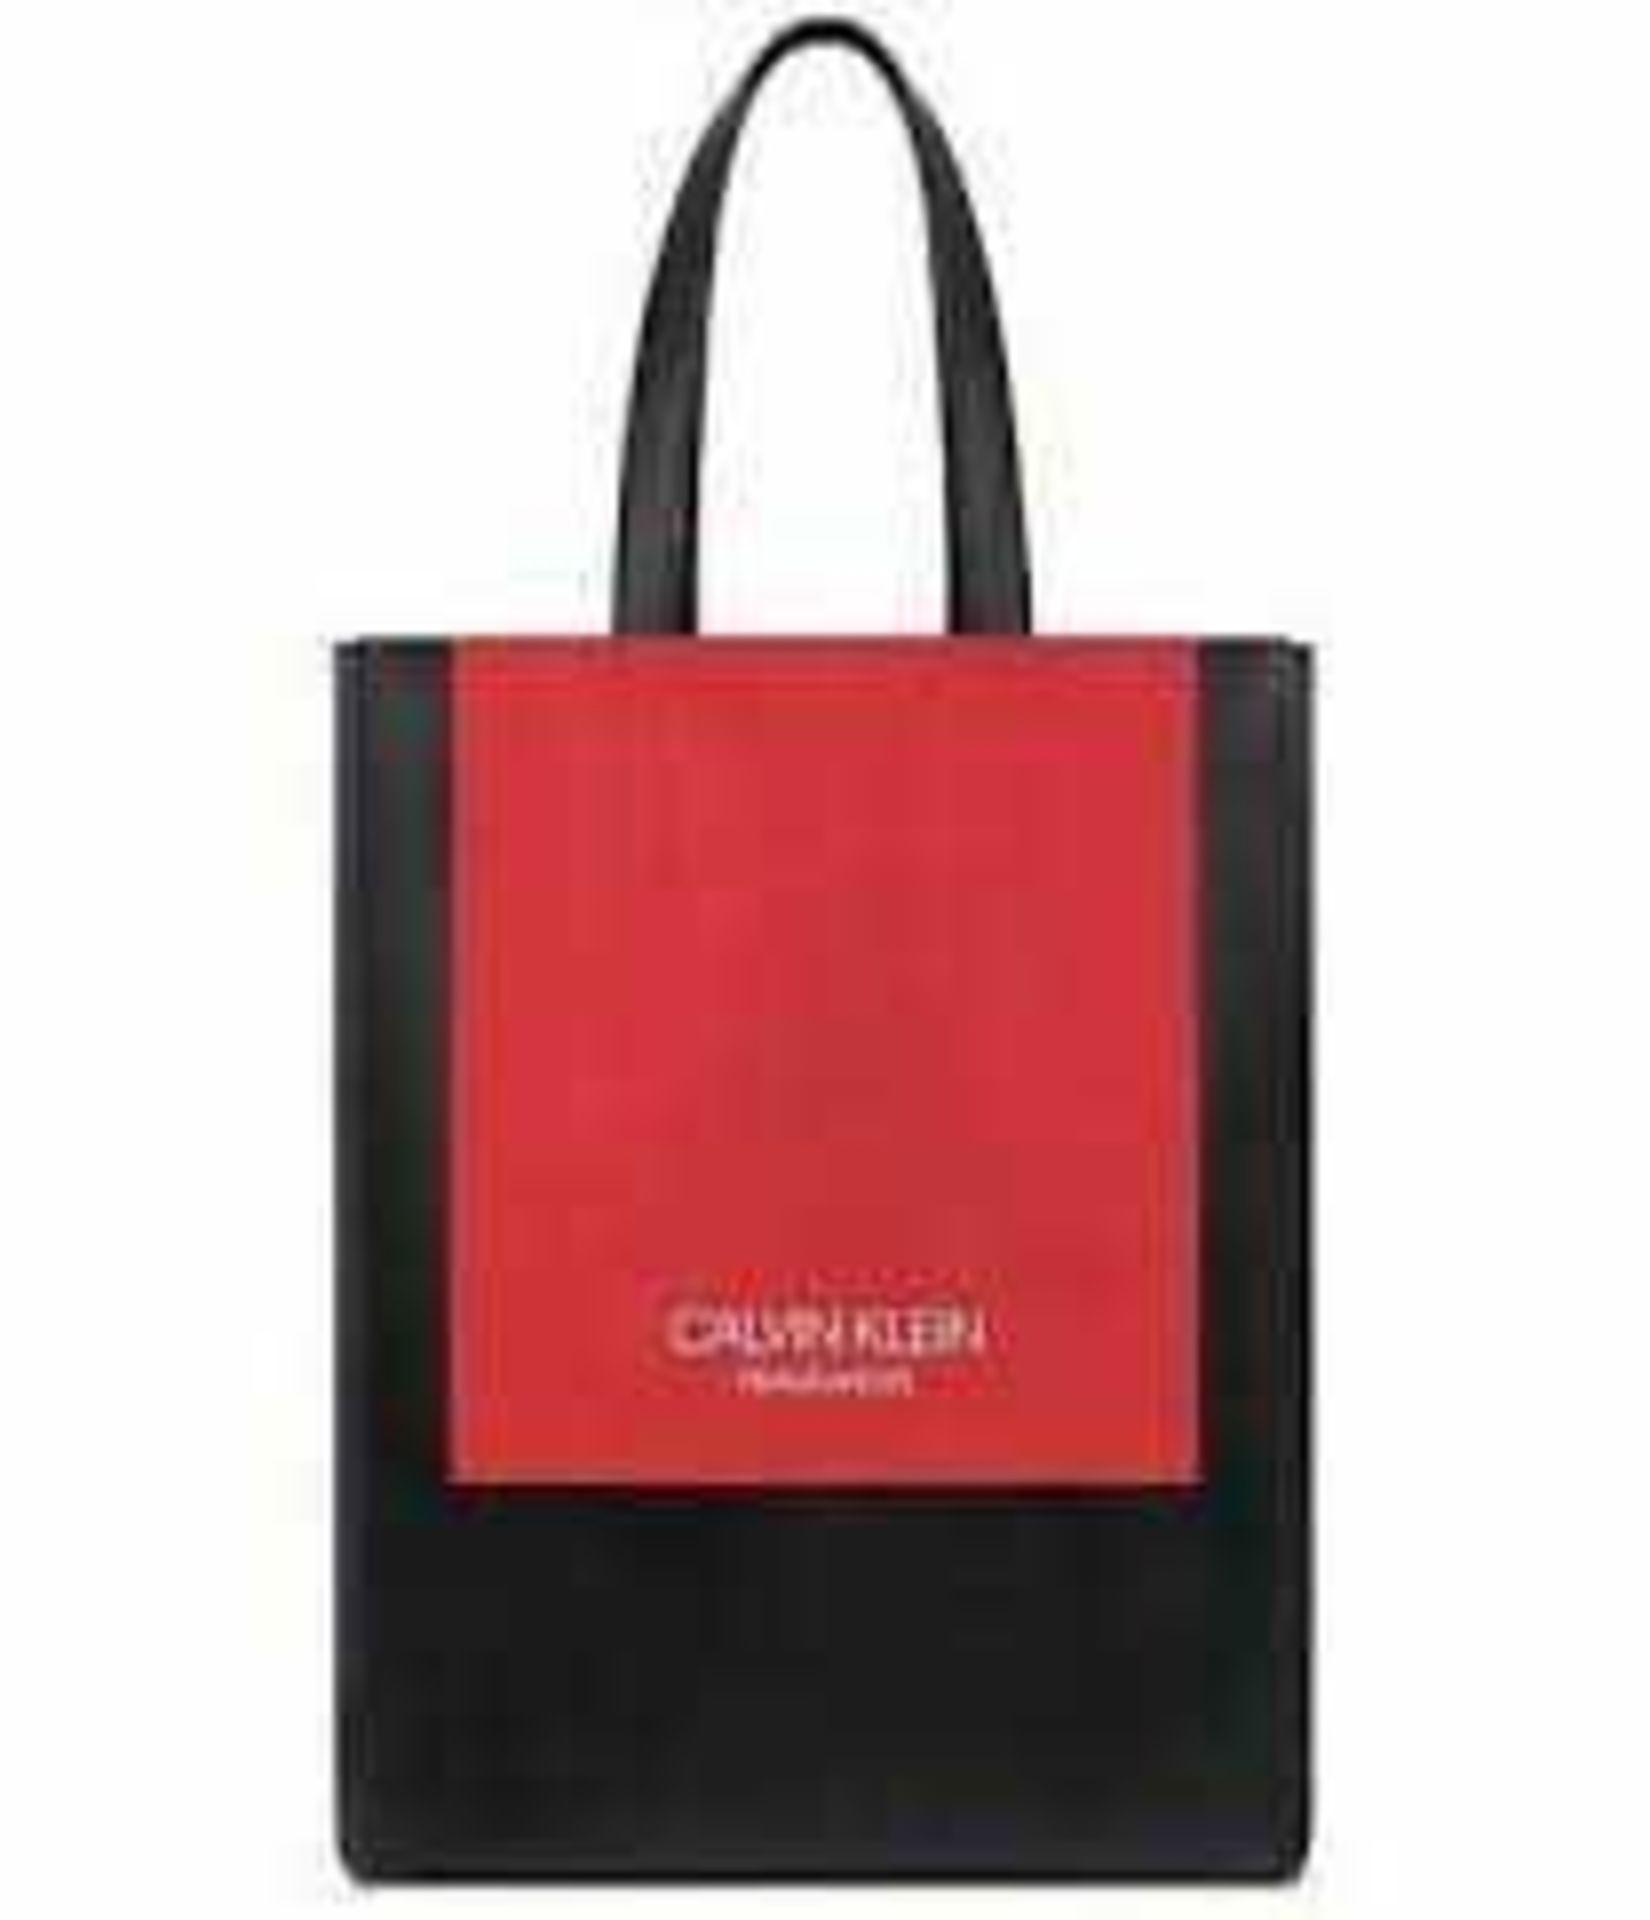 RRP £50 Each Brand New Bagged Tagged And Sealed Calvin Klein Fragrances Tote Shopping Bag